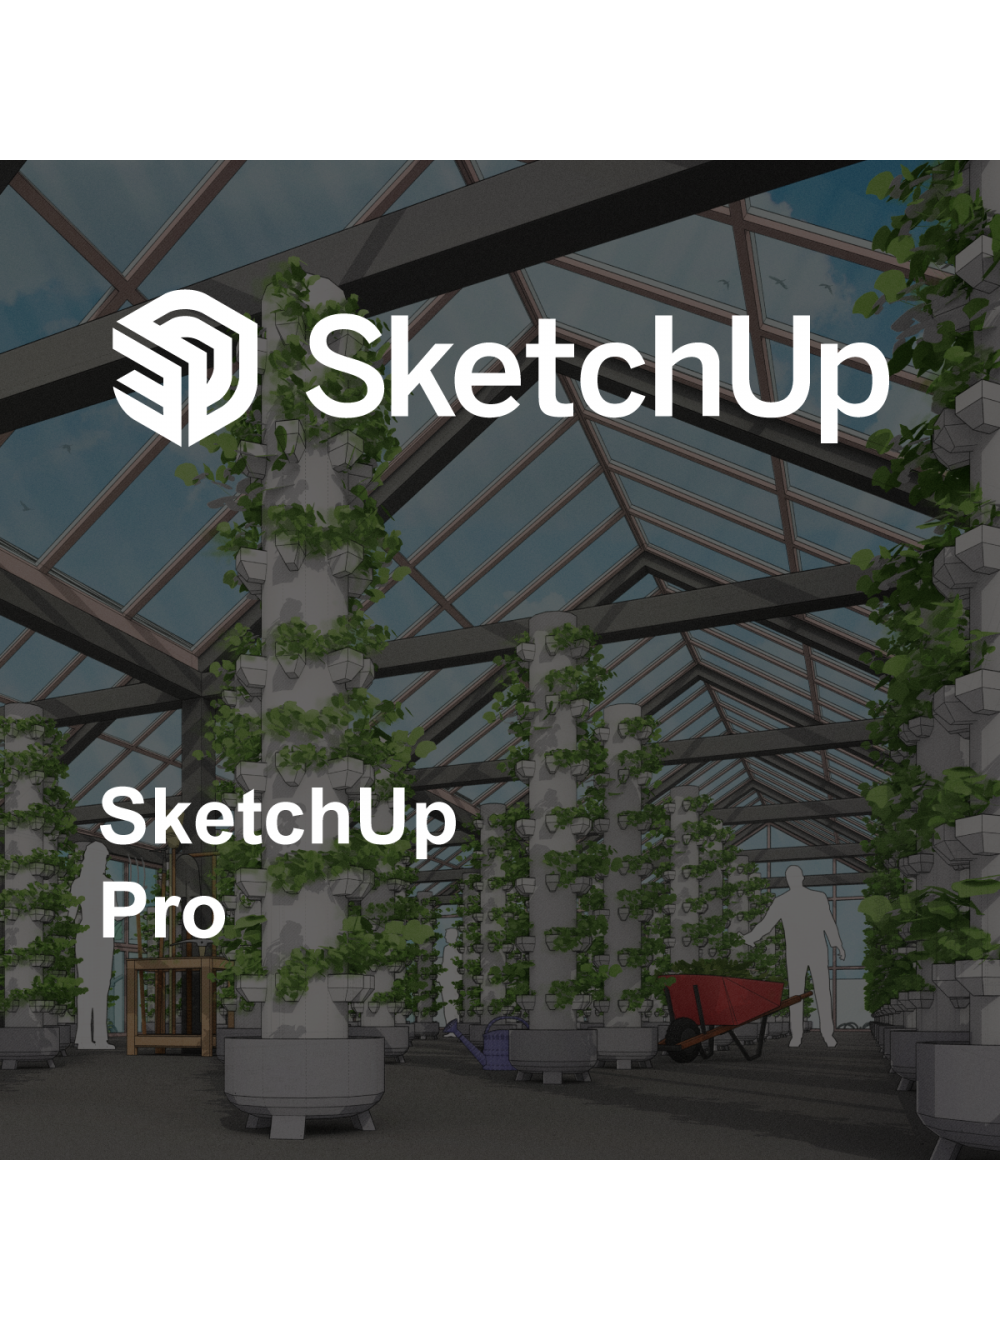 difference between sketchup and sketchup pro